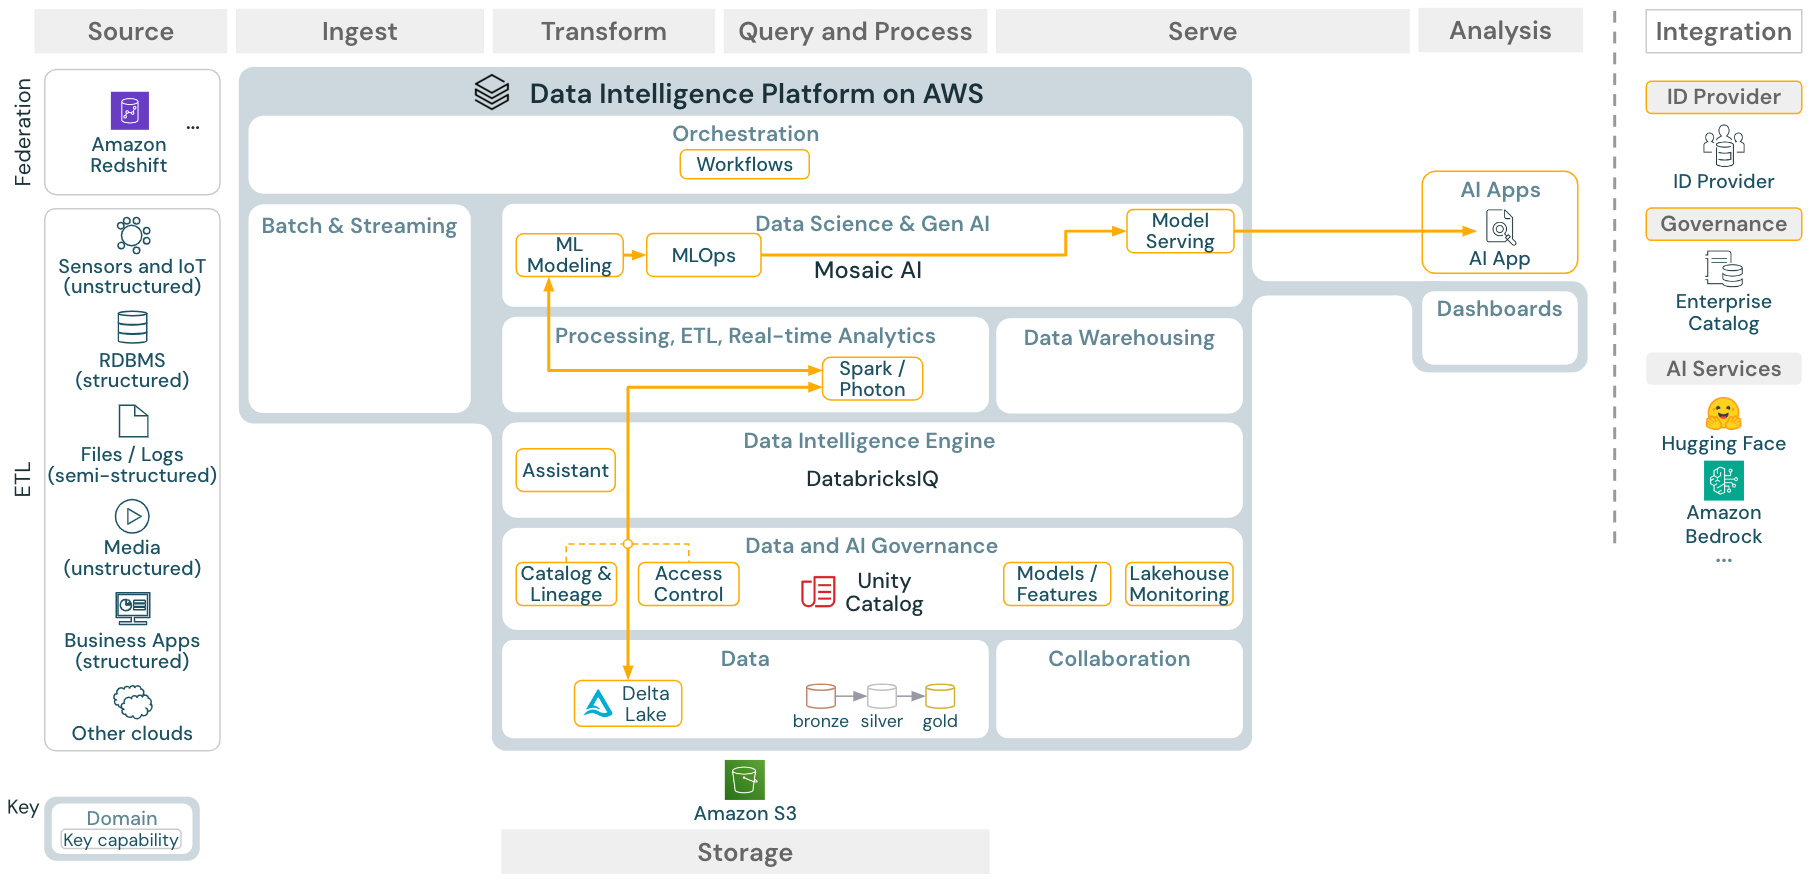 Machine learning and AI reference architecture for Databricks on AWS